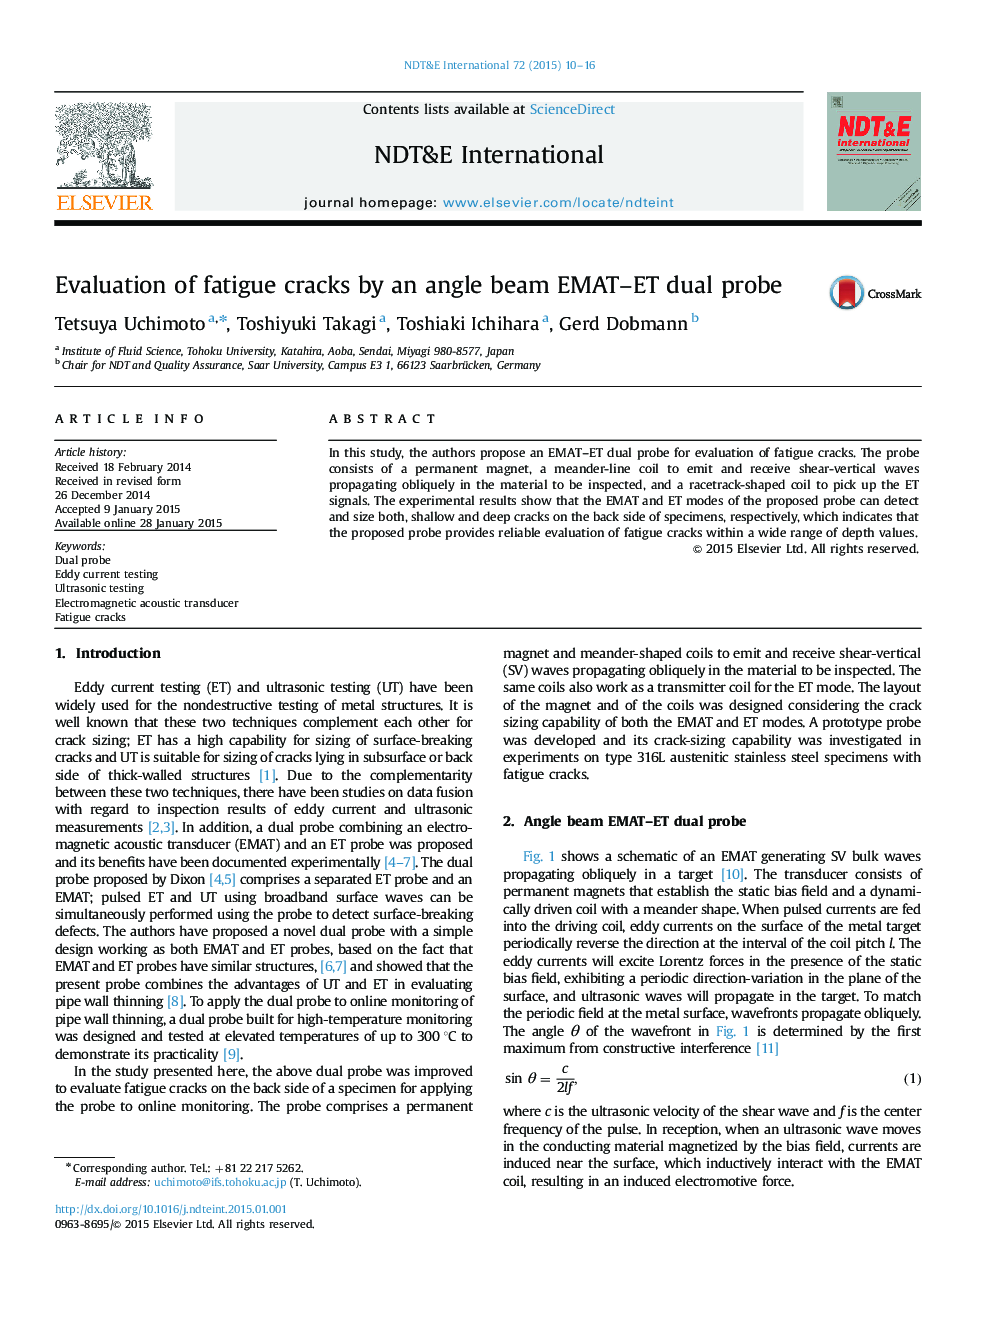 Evaluation of fatigue cracks by an angle beam EMAT–ET dual probe